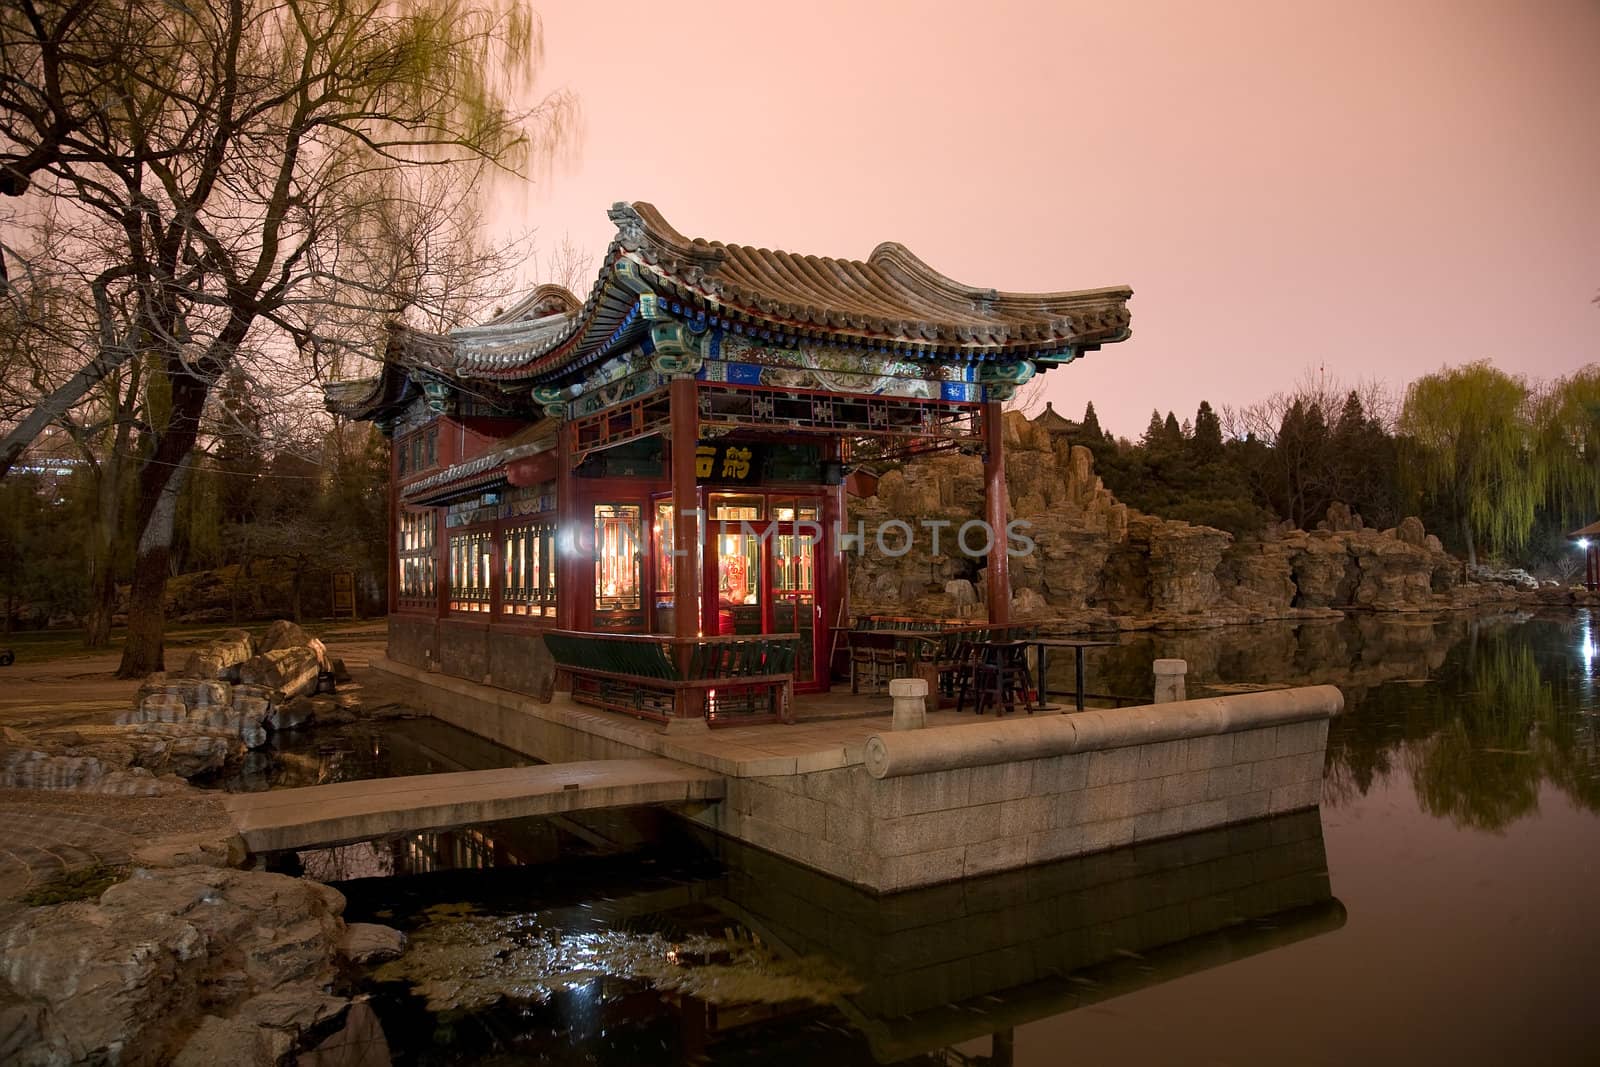 Stone Boat Temple of Sun Beijing China by bill_perry